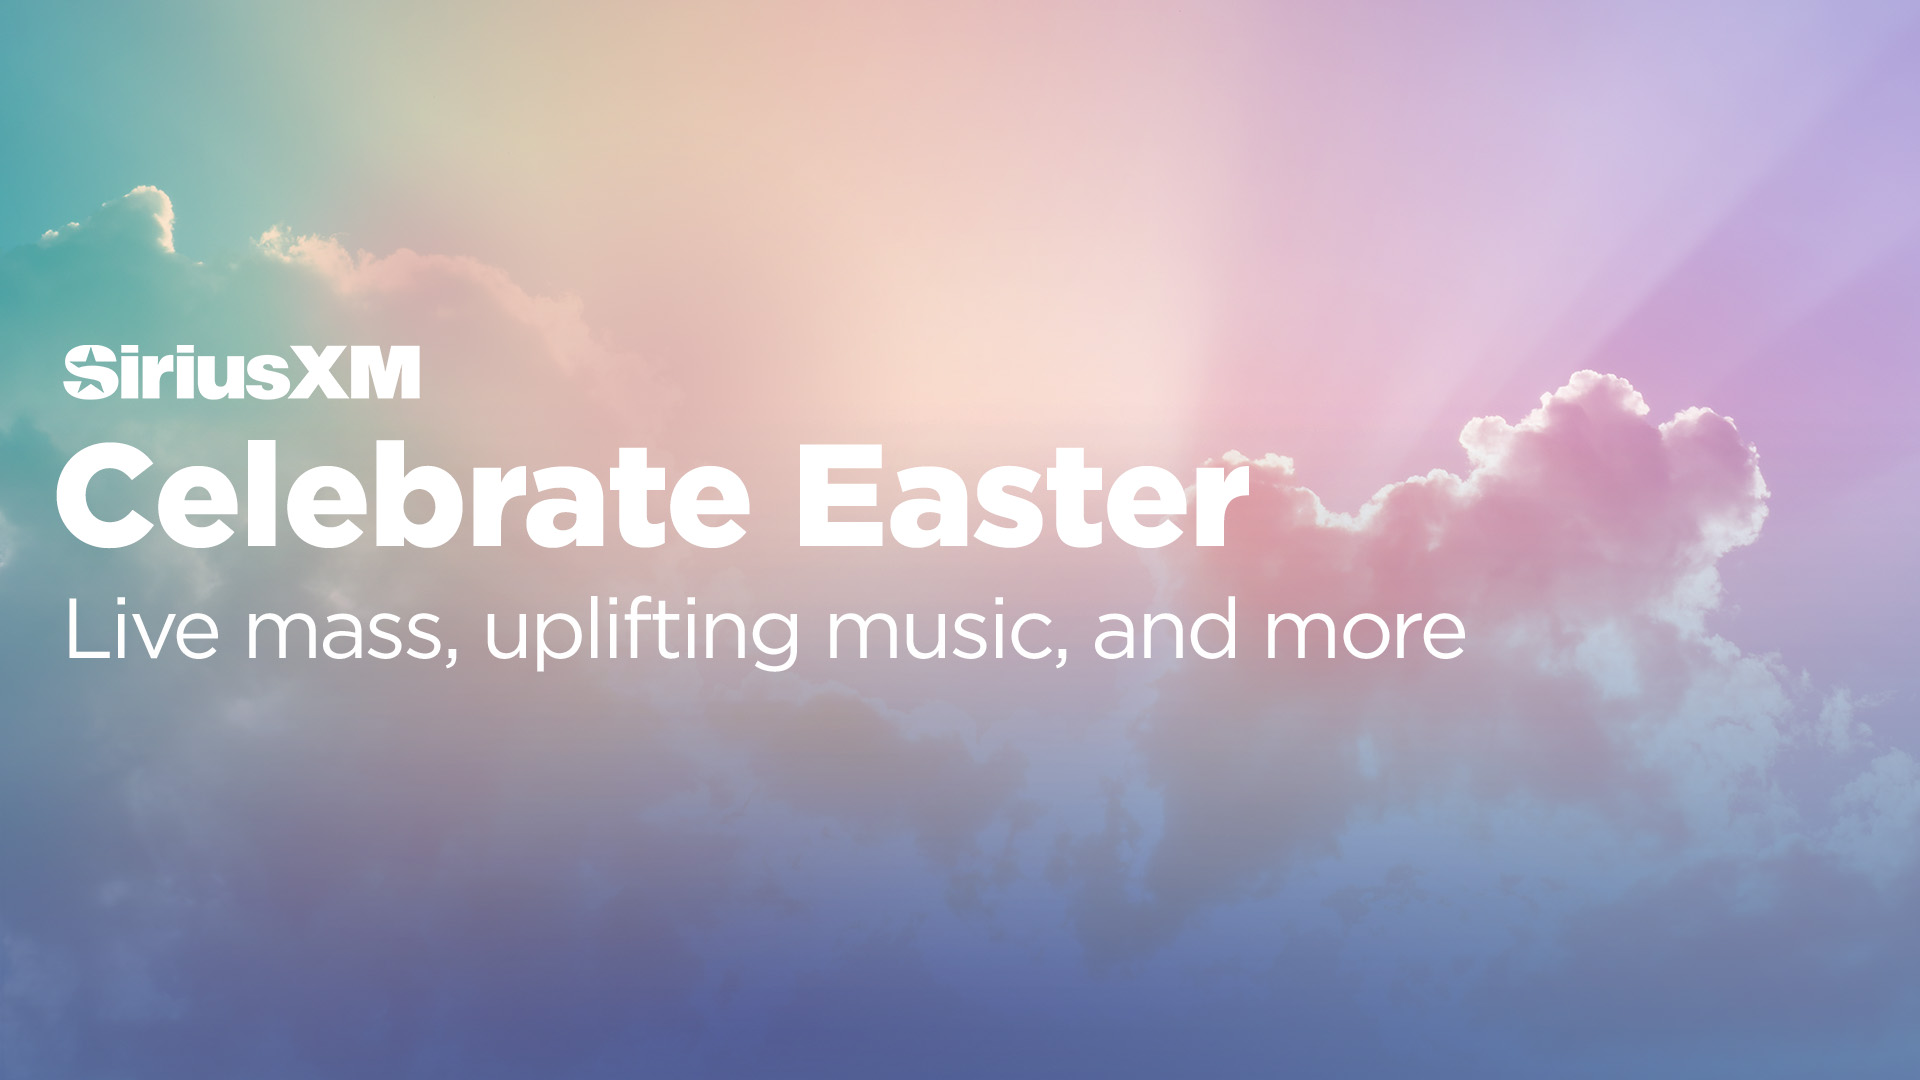 SiriusXM - Celebrate Easter - Live mass, uplifting music, and more